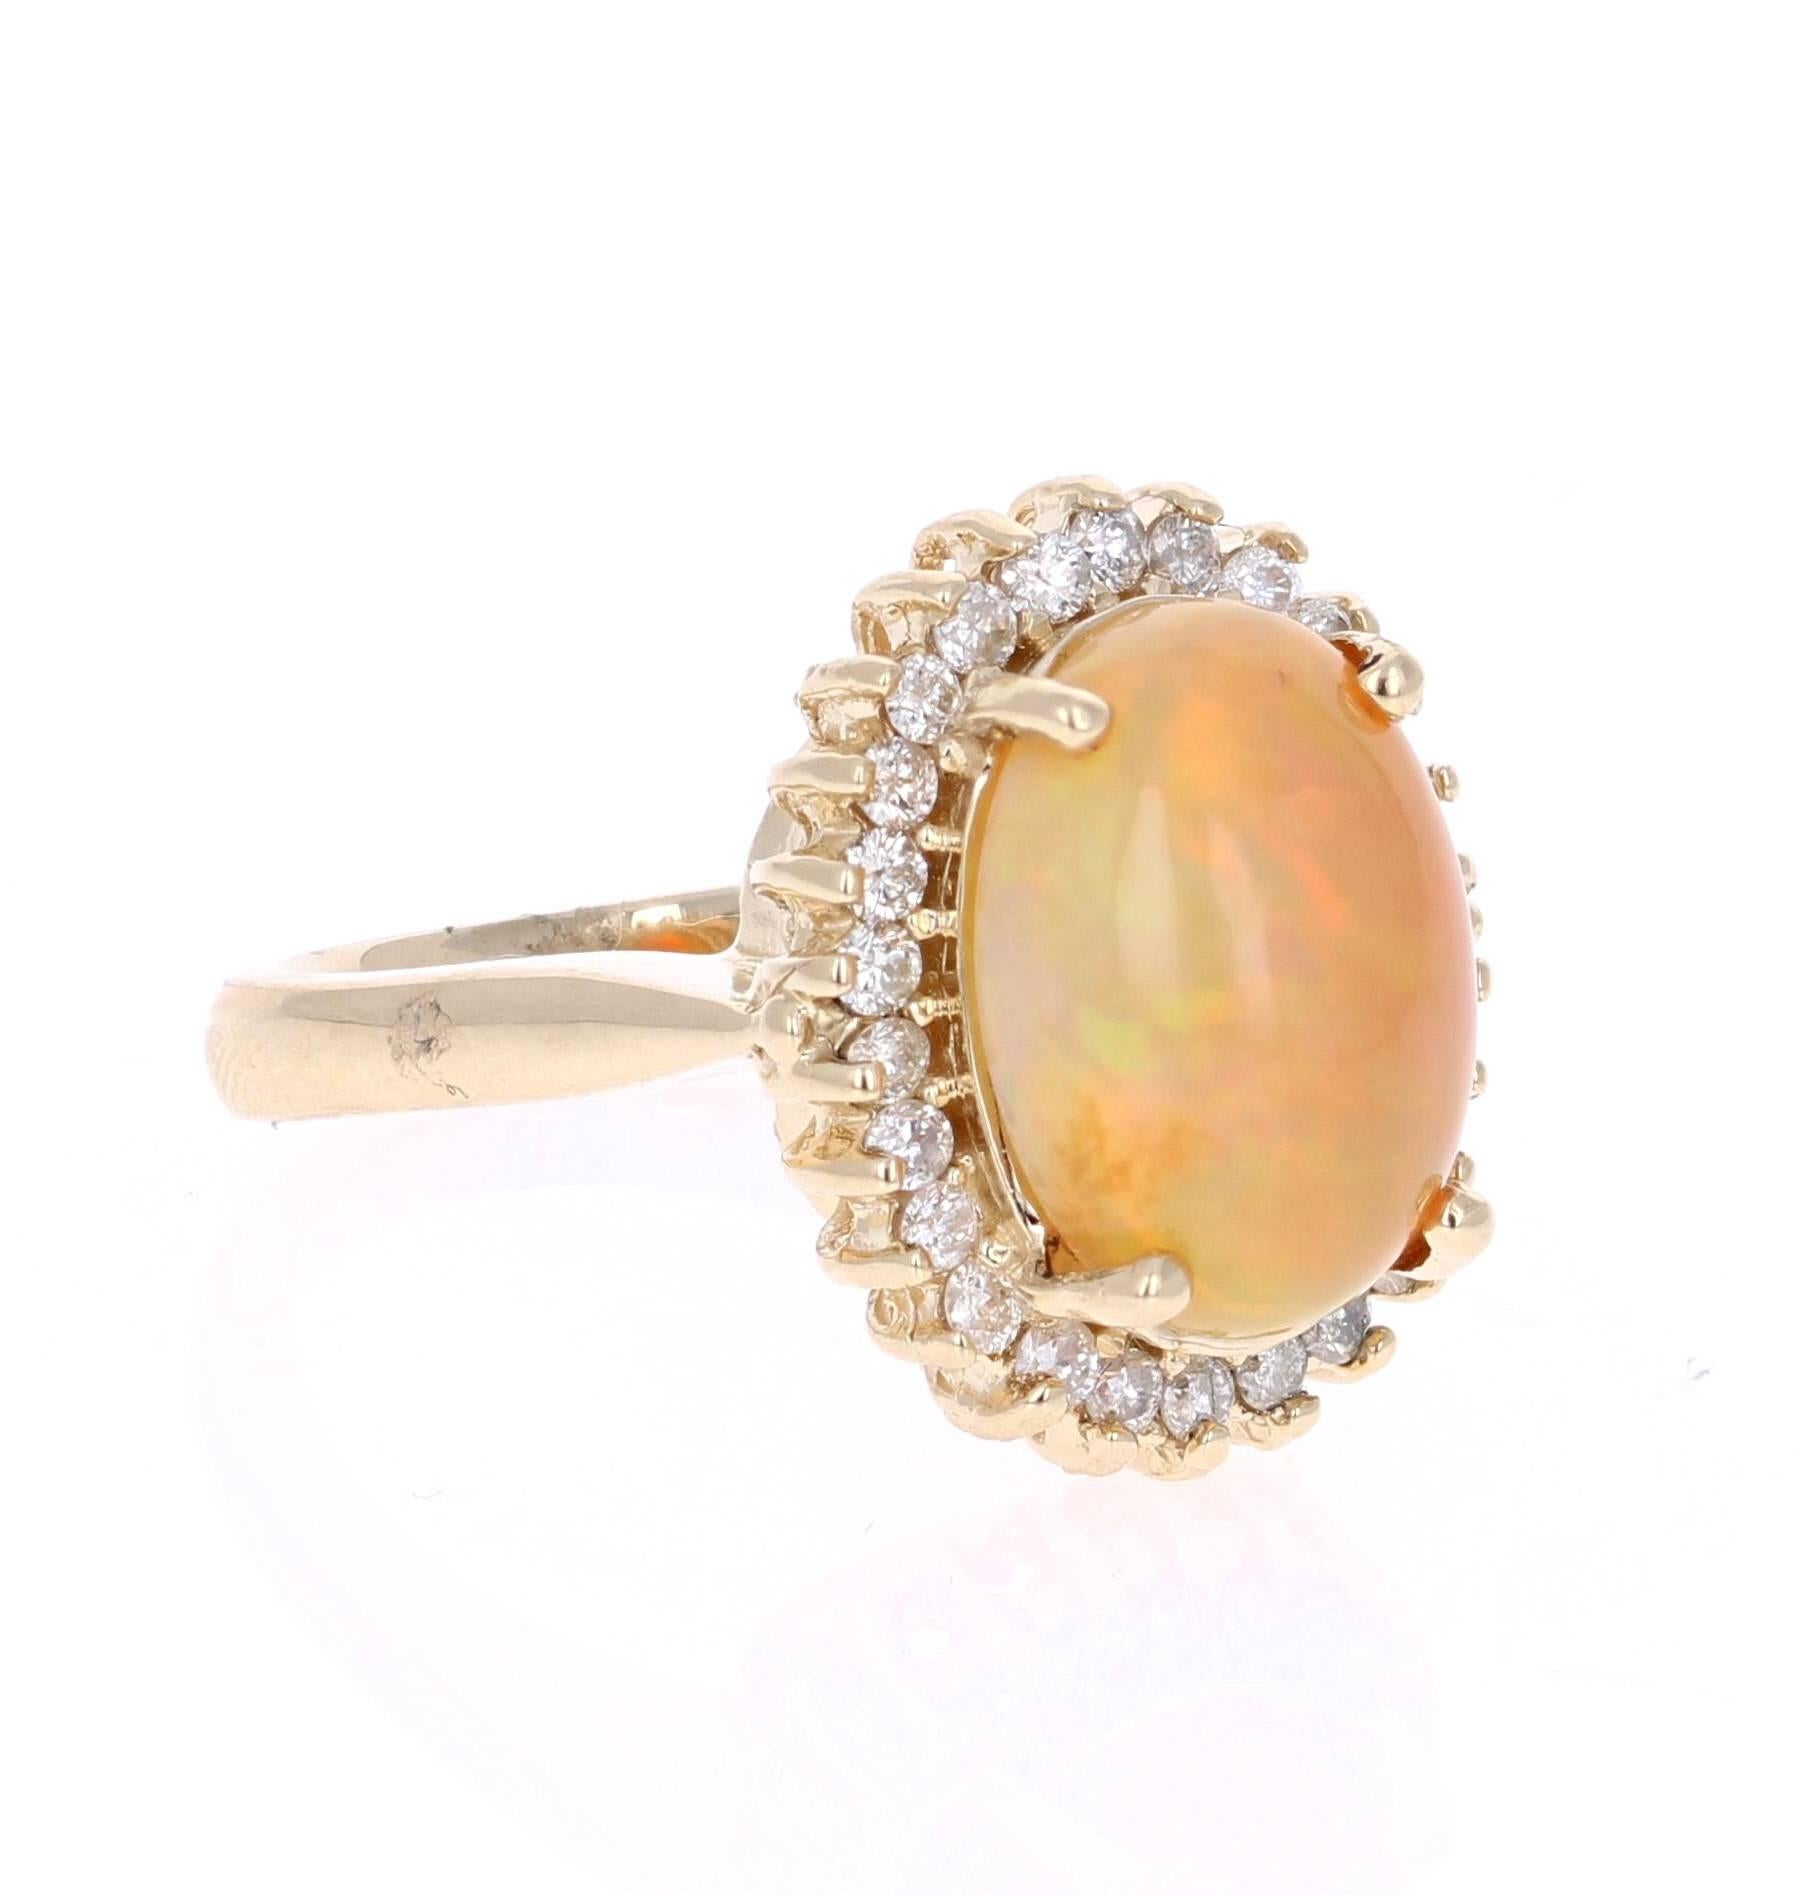 4.02 Carat Oval Cut Opal Diamond Yellow Gold Cocktail Ring!

Stunning 4.02 carat Opal and Diamond Ring in 14K Yellow Gold.  The Opal in this Ring weighs 3.45 carats and is surrounded by 26 Round Cut Diamonds that weigh 0.57 carat.  The total carat